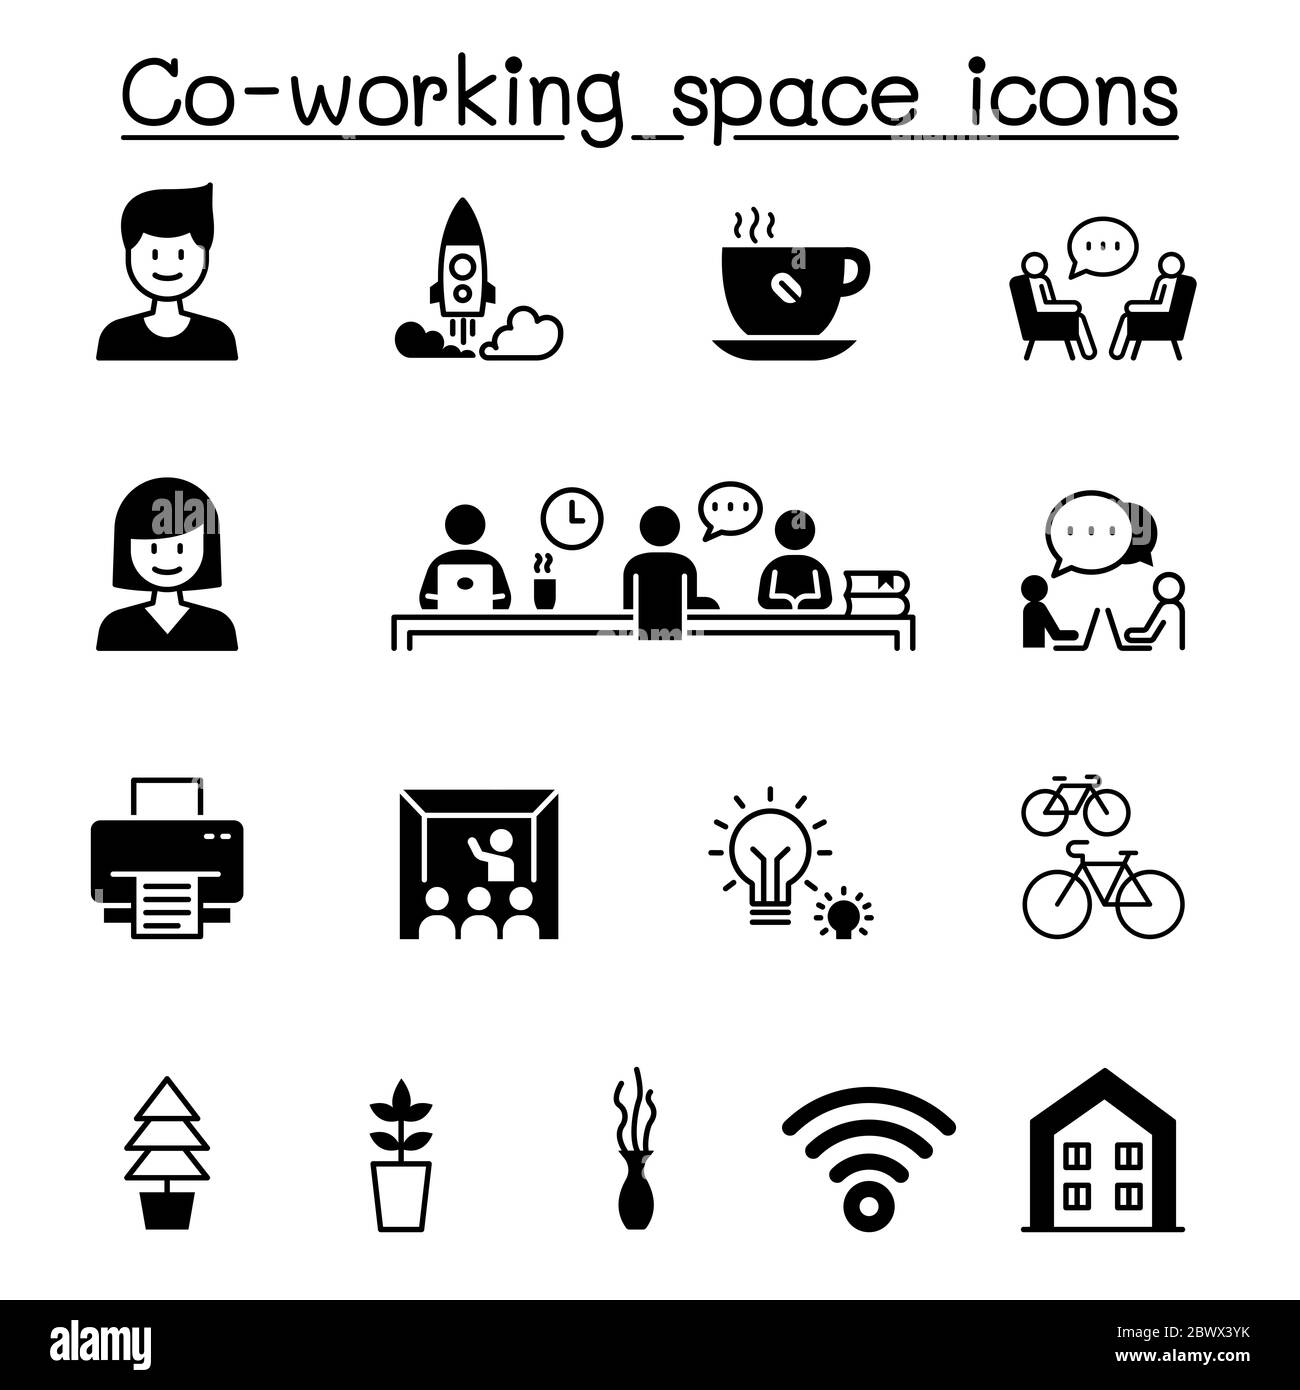 Set of Co-working space & Startup related vector icons. contains such Icons as freelance, bicycle, office, work from home, brainstorm and more. Stock Photo